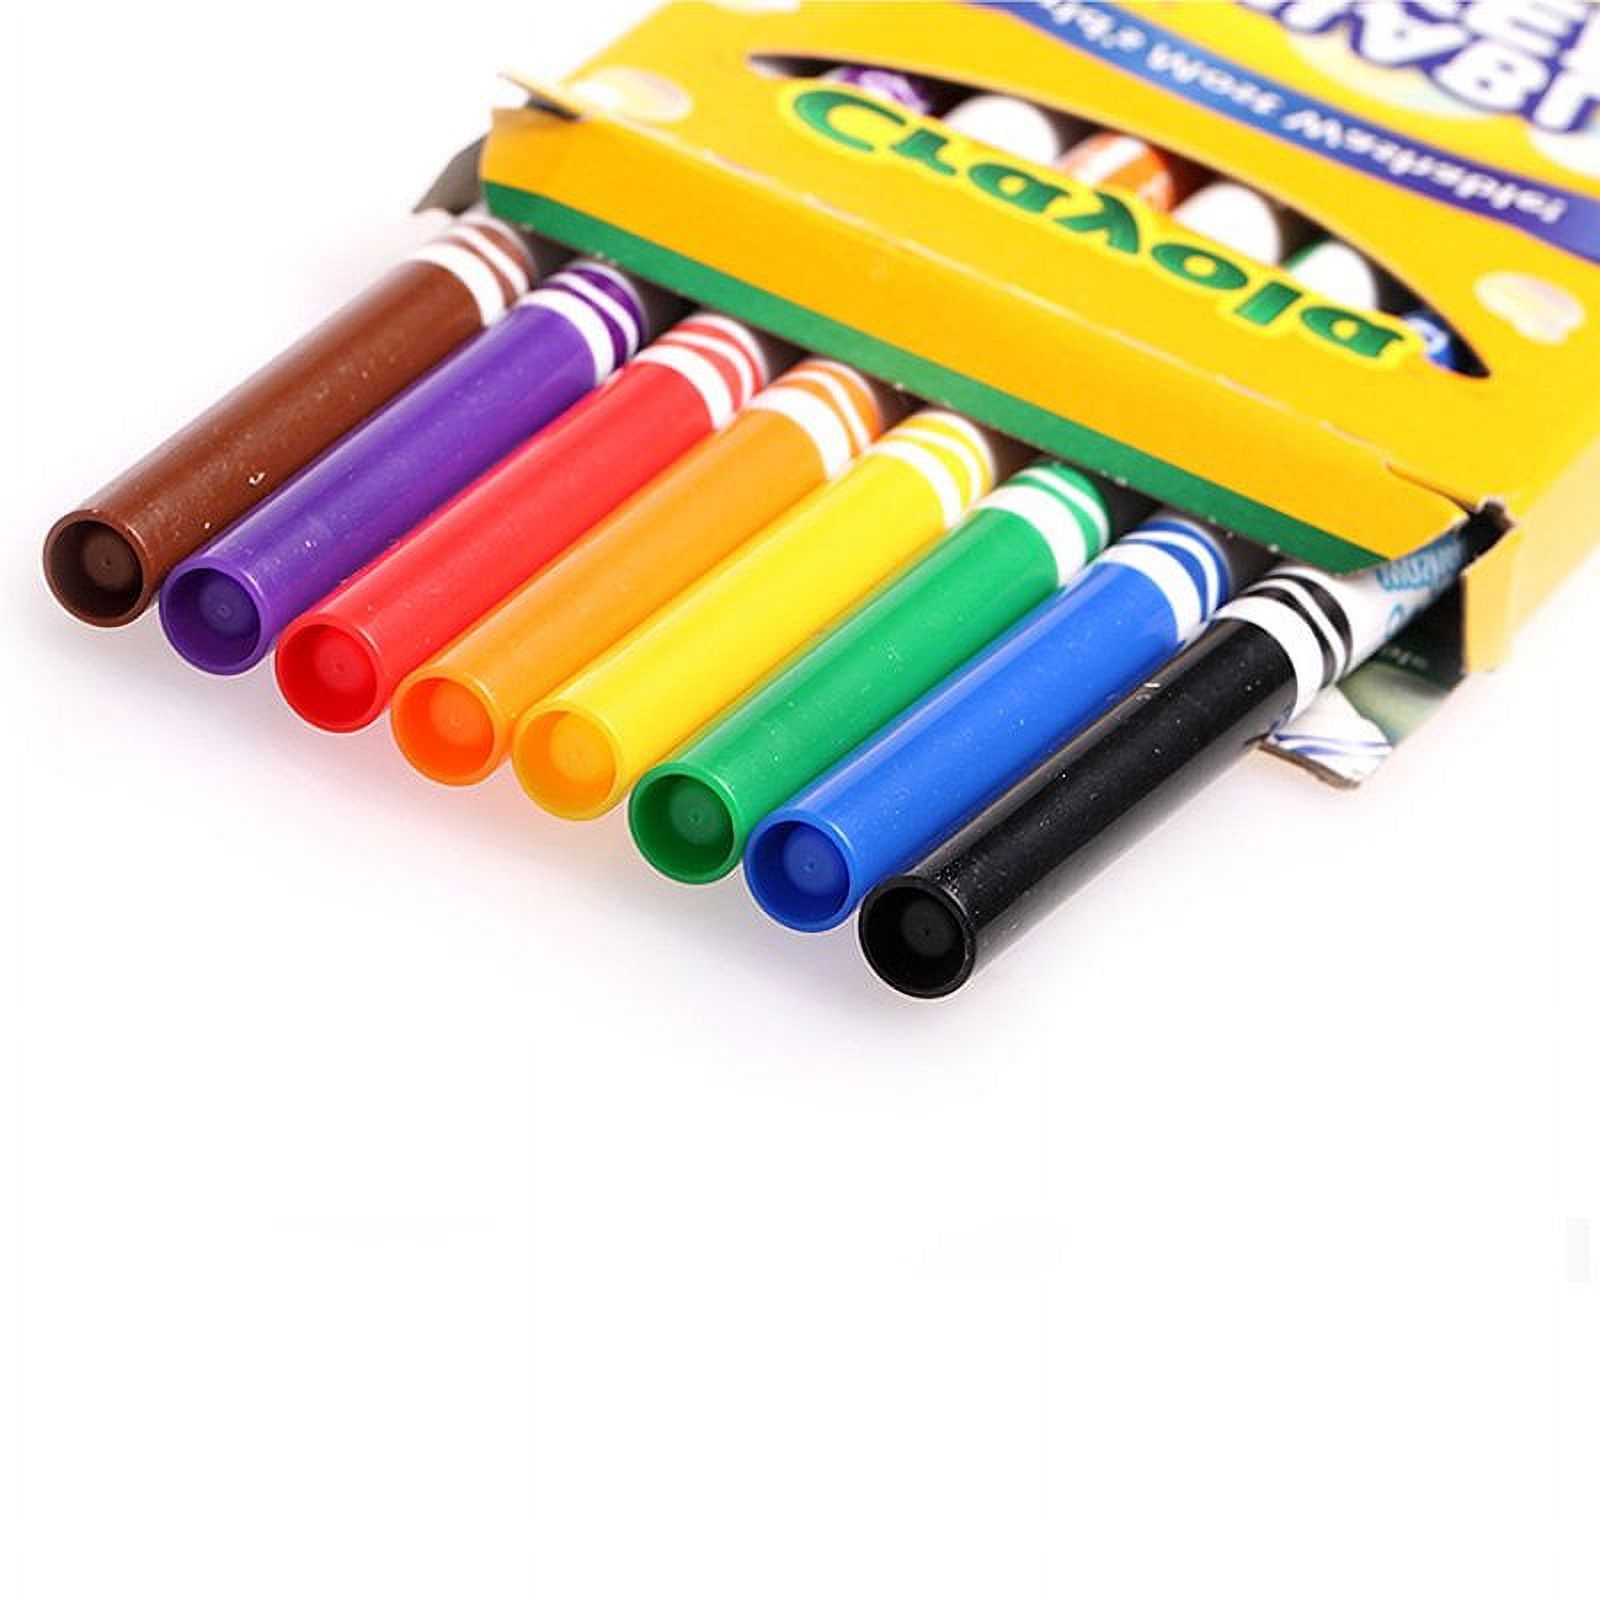 Crayola Washable Markers, Fine Point, Classic Colors, 8 Count - image 5 of 5